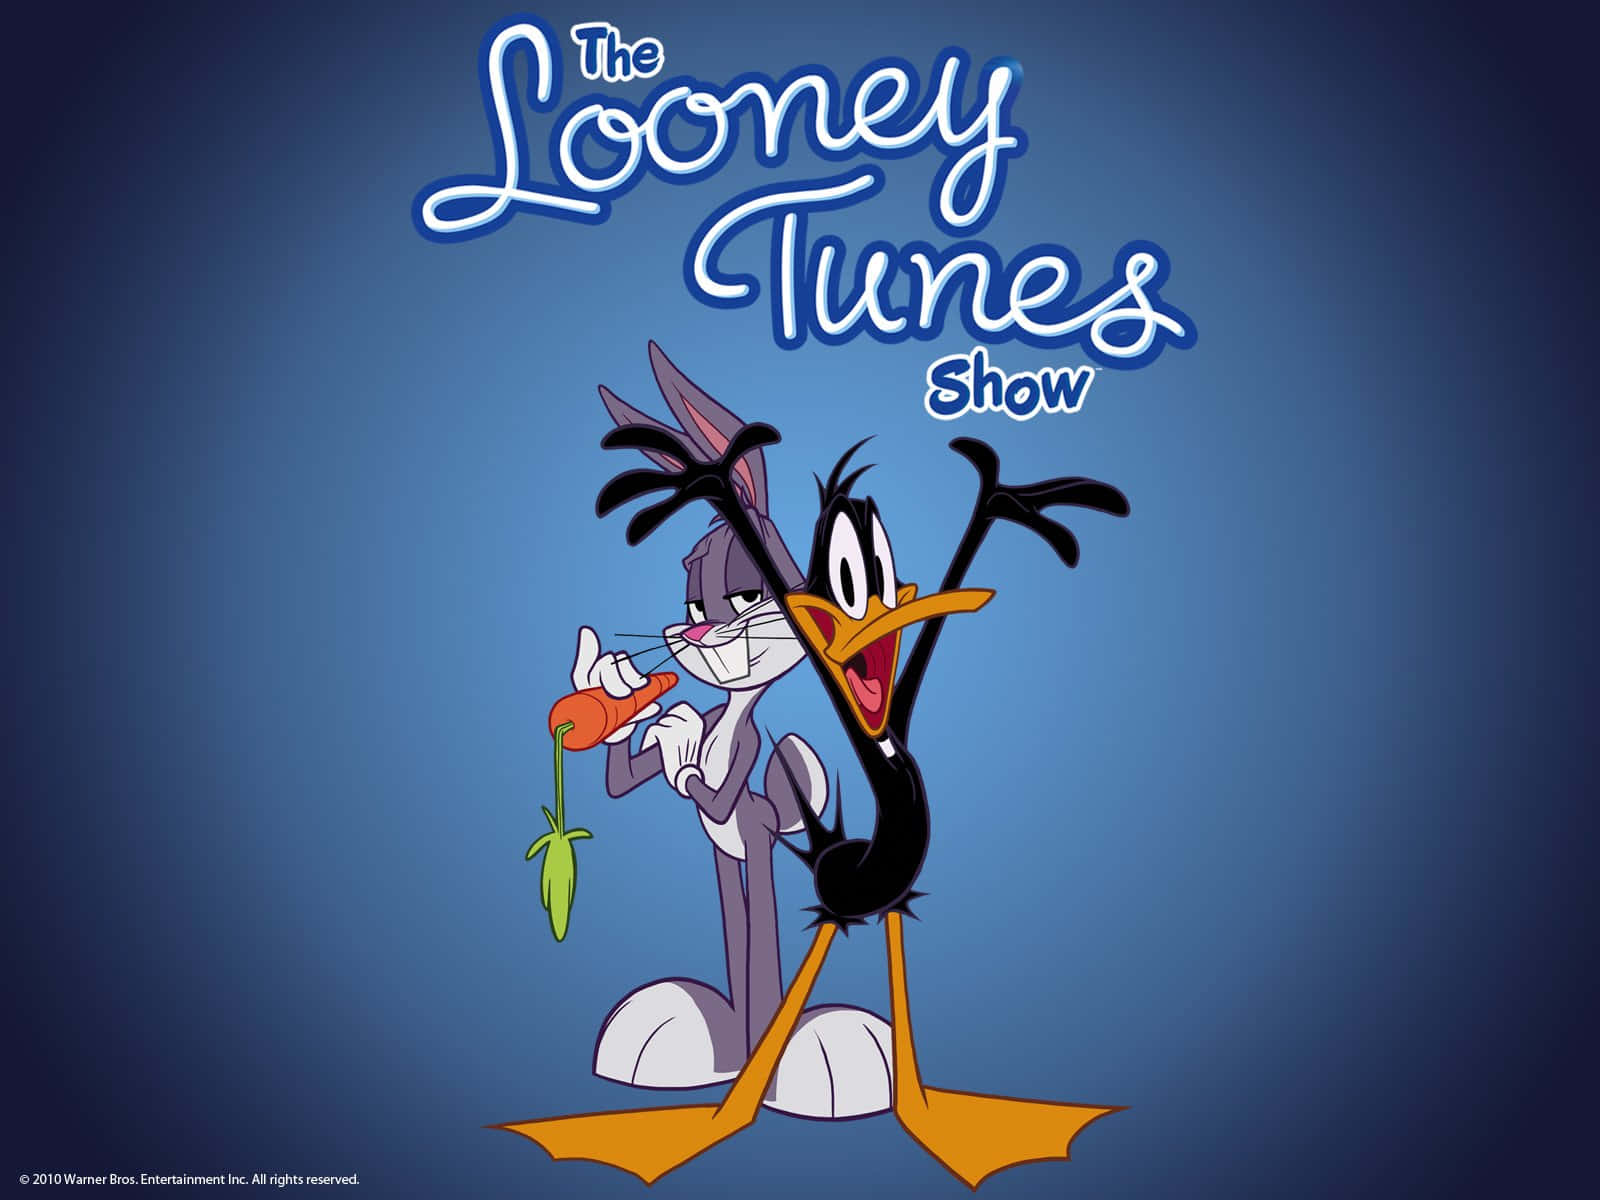 Get your daily dose of laugher with Bugs Bunny and the Looney Tunes gang!